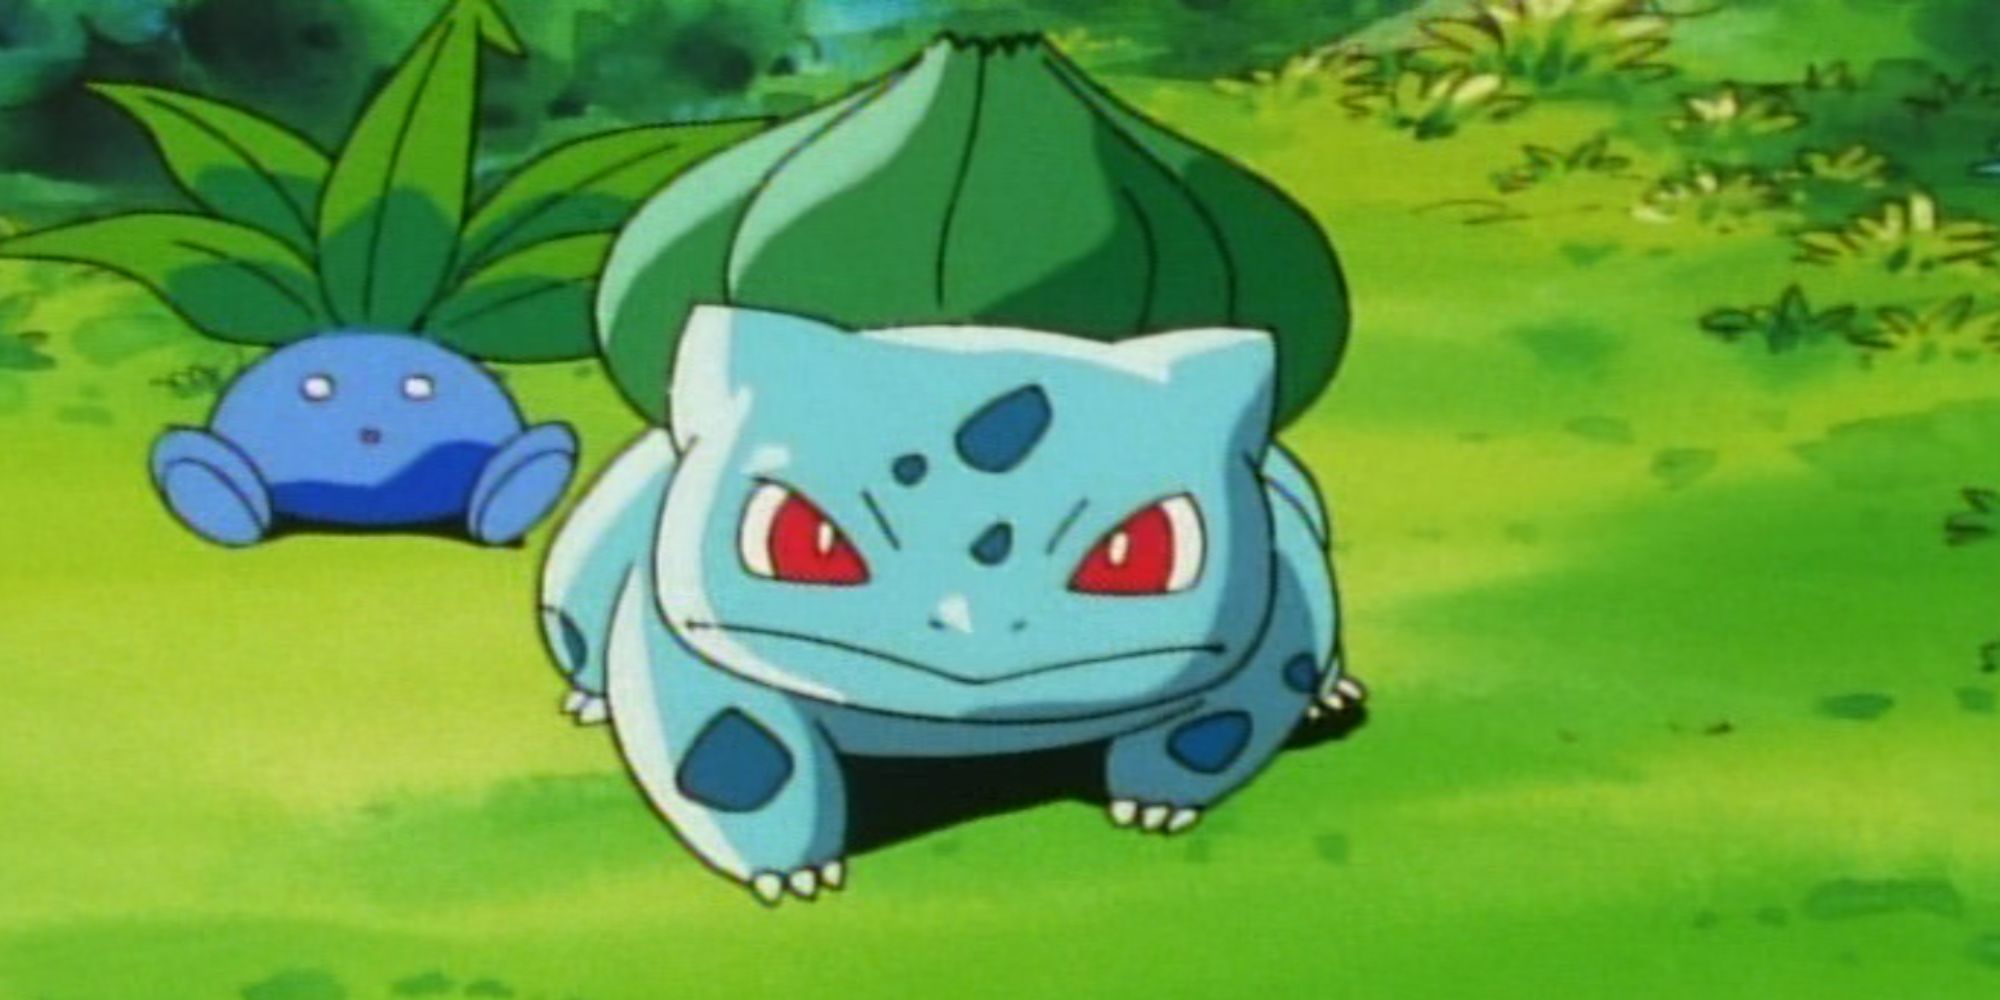 Bulbasaur defends Oddish in a forest